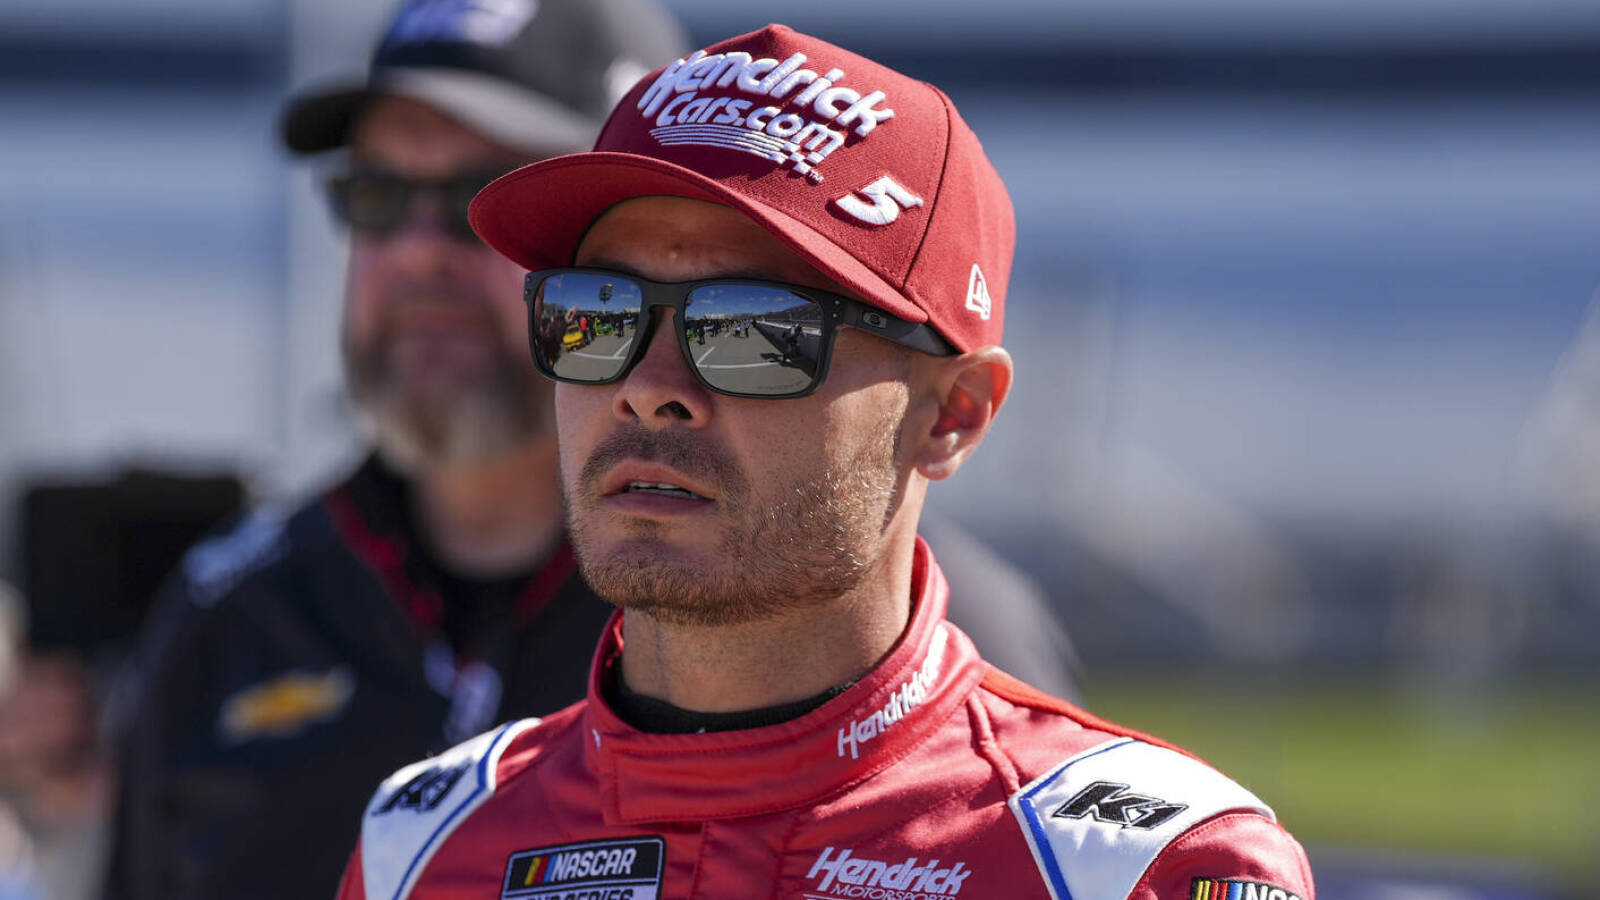 Kyle Larson not allowed to qualify, Michael McDowell wins pole for GEICO 500 at Talladega